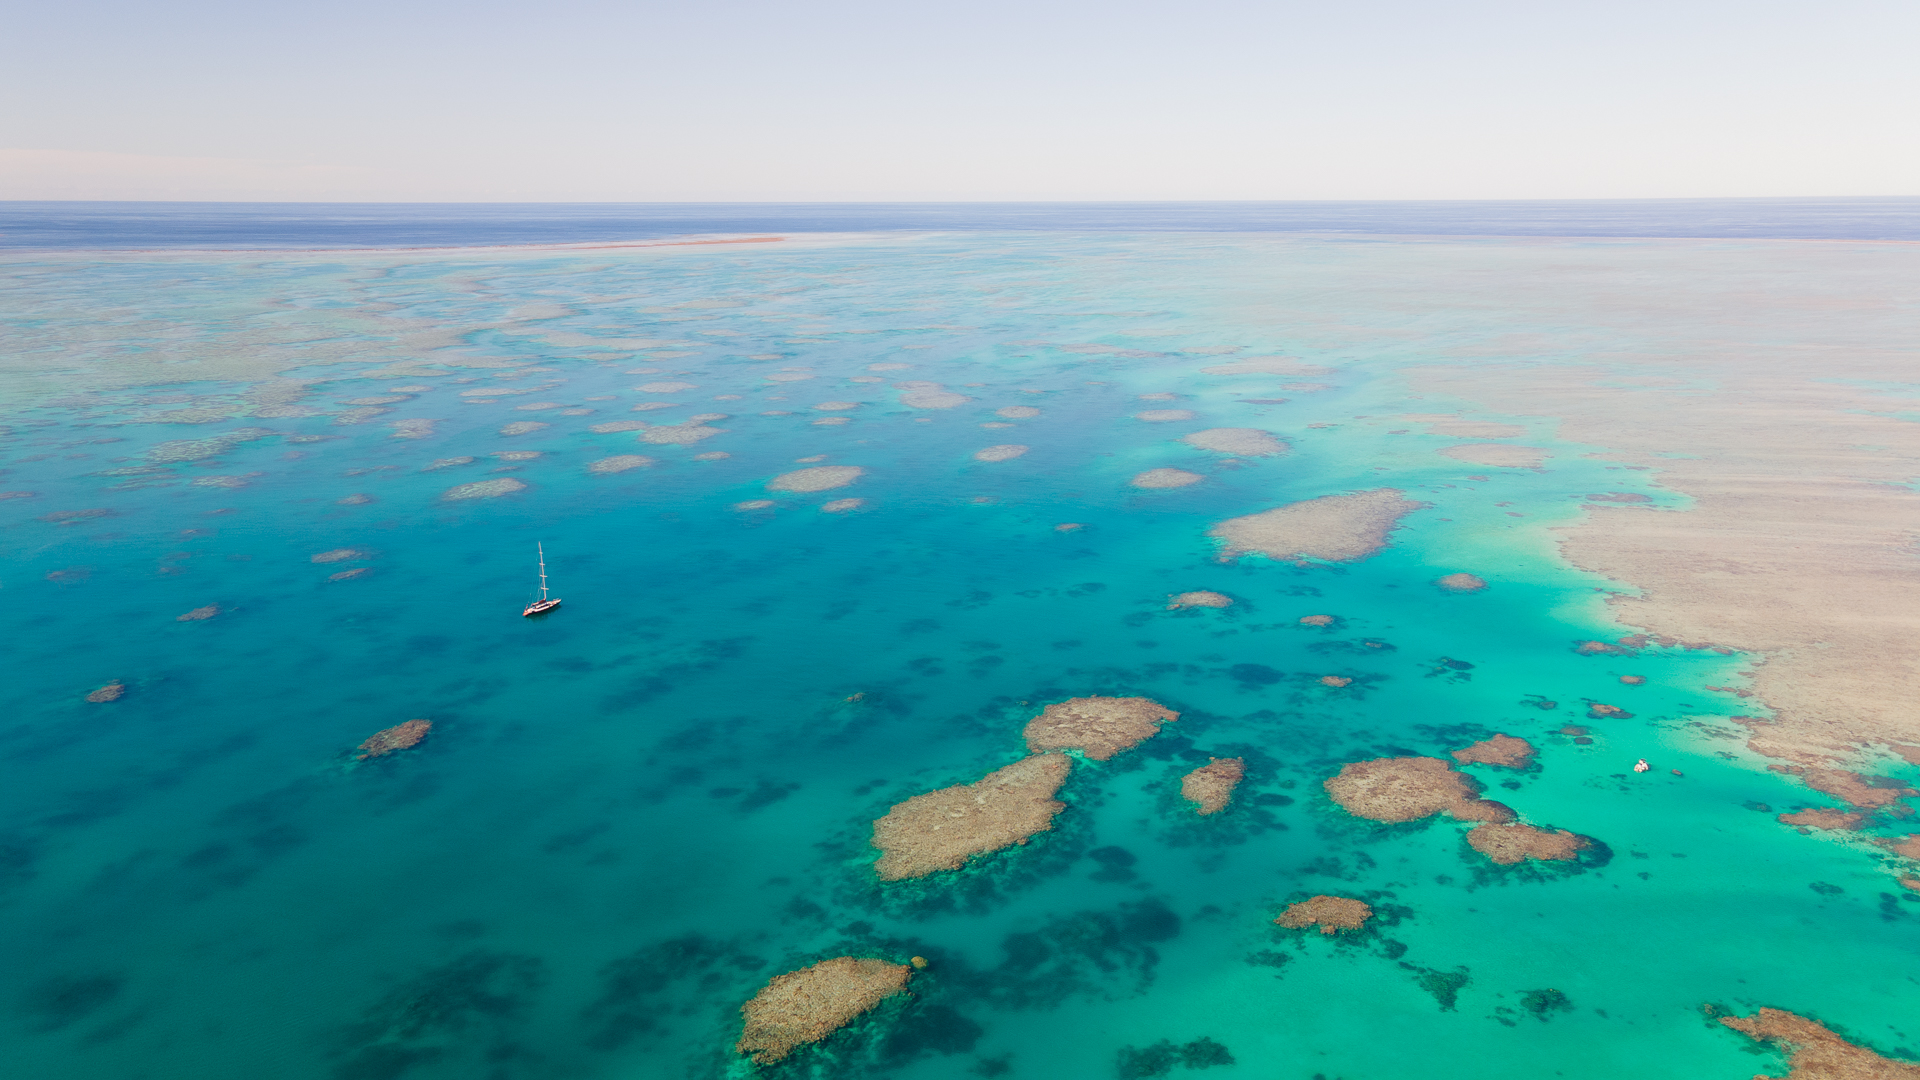 Four Day & Three Night Whitsunday Islands & Outer Reef Sailing Adventure on Broomstick